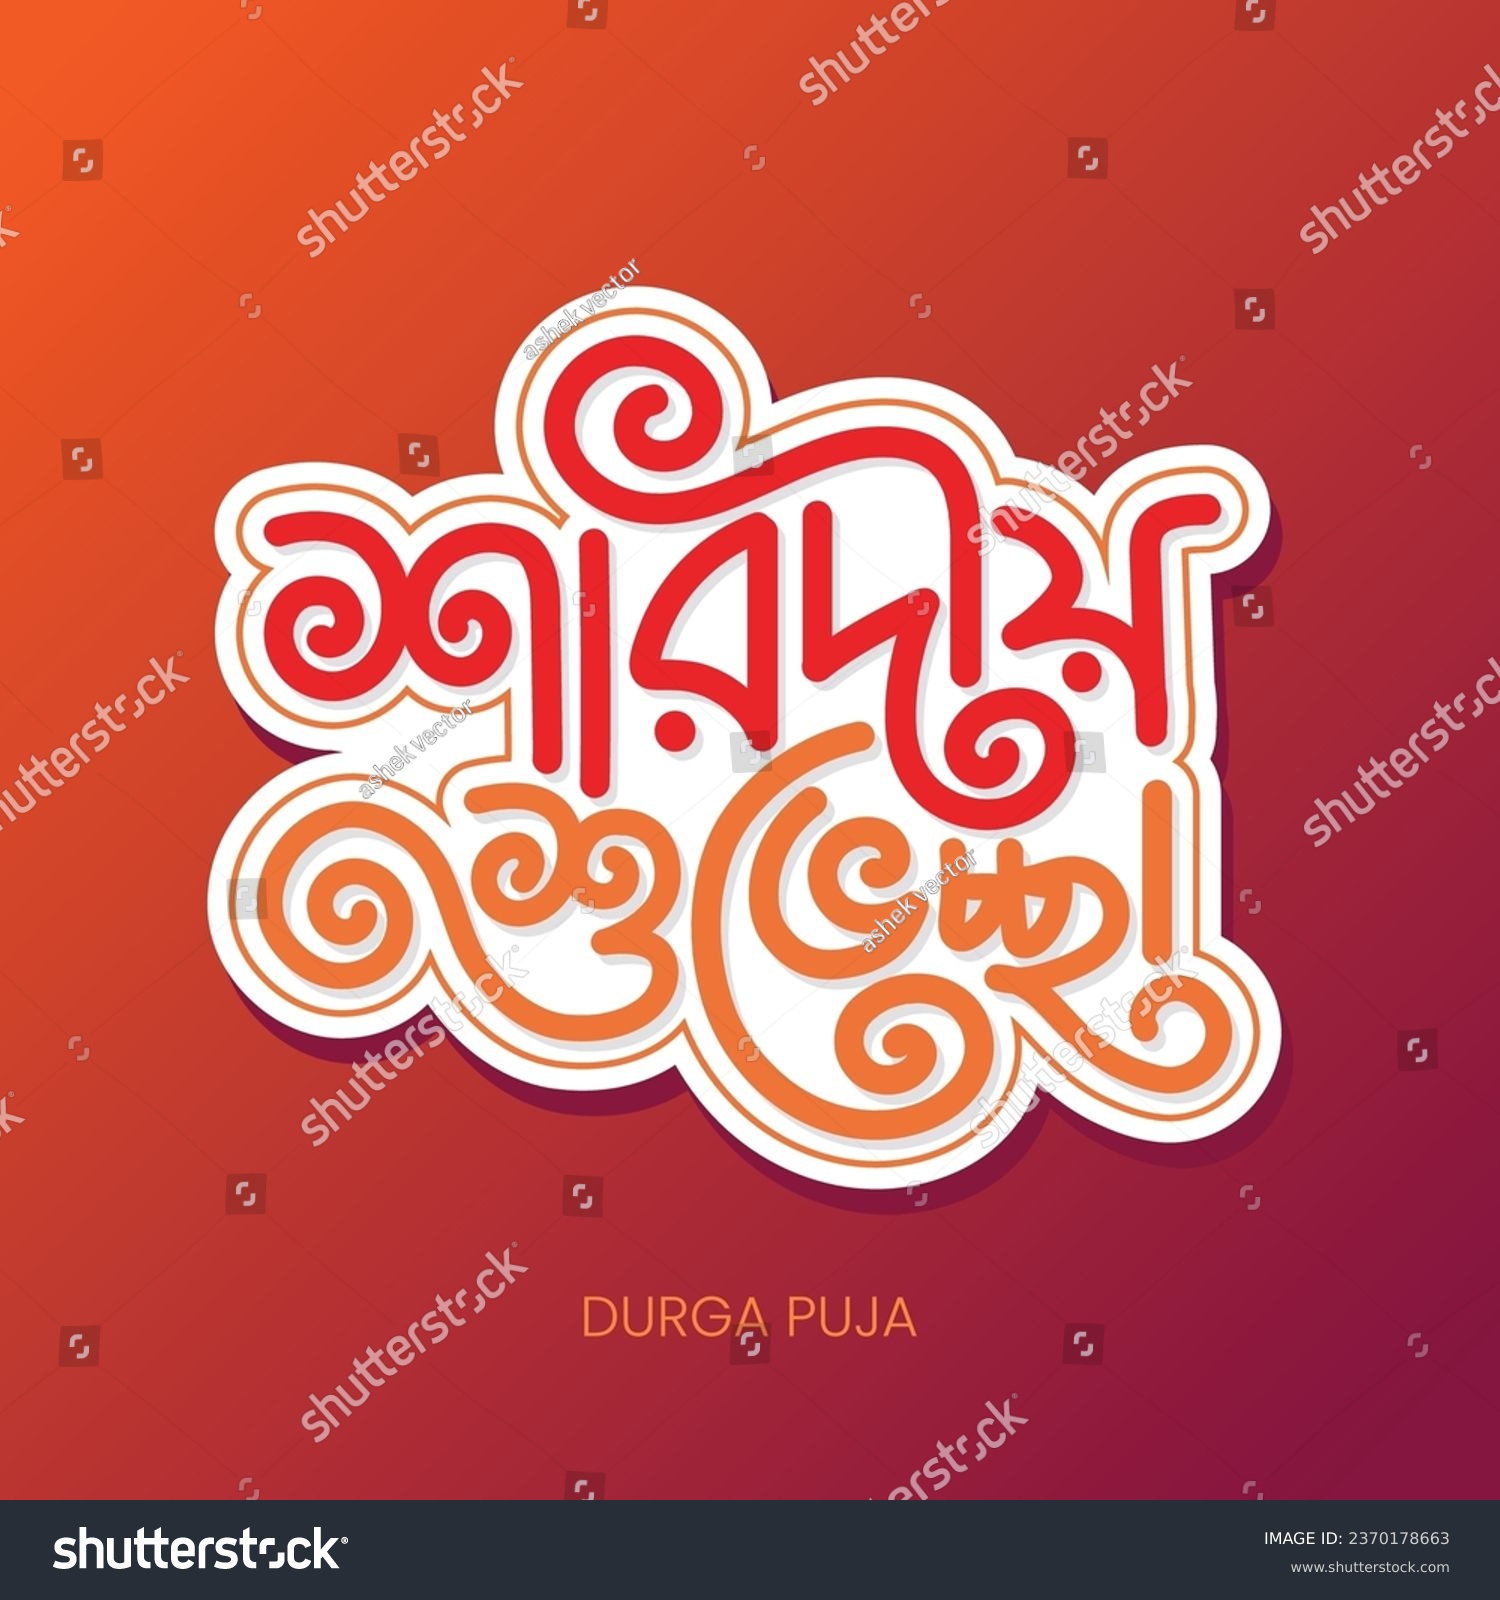 SVG of Durga Puja Greeting Card Bangla Typography Template Design. Durga Puja vector hand lettering design on red Color Background To Celebrate Indian Annual Hindu Festival Holiday. svg